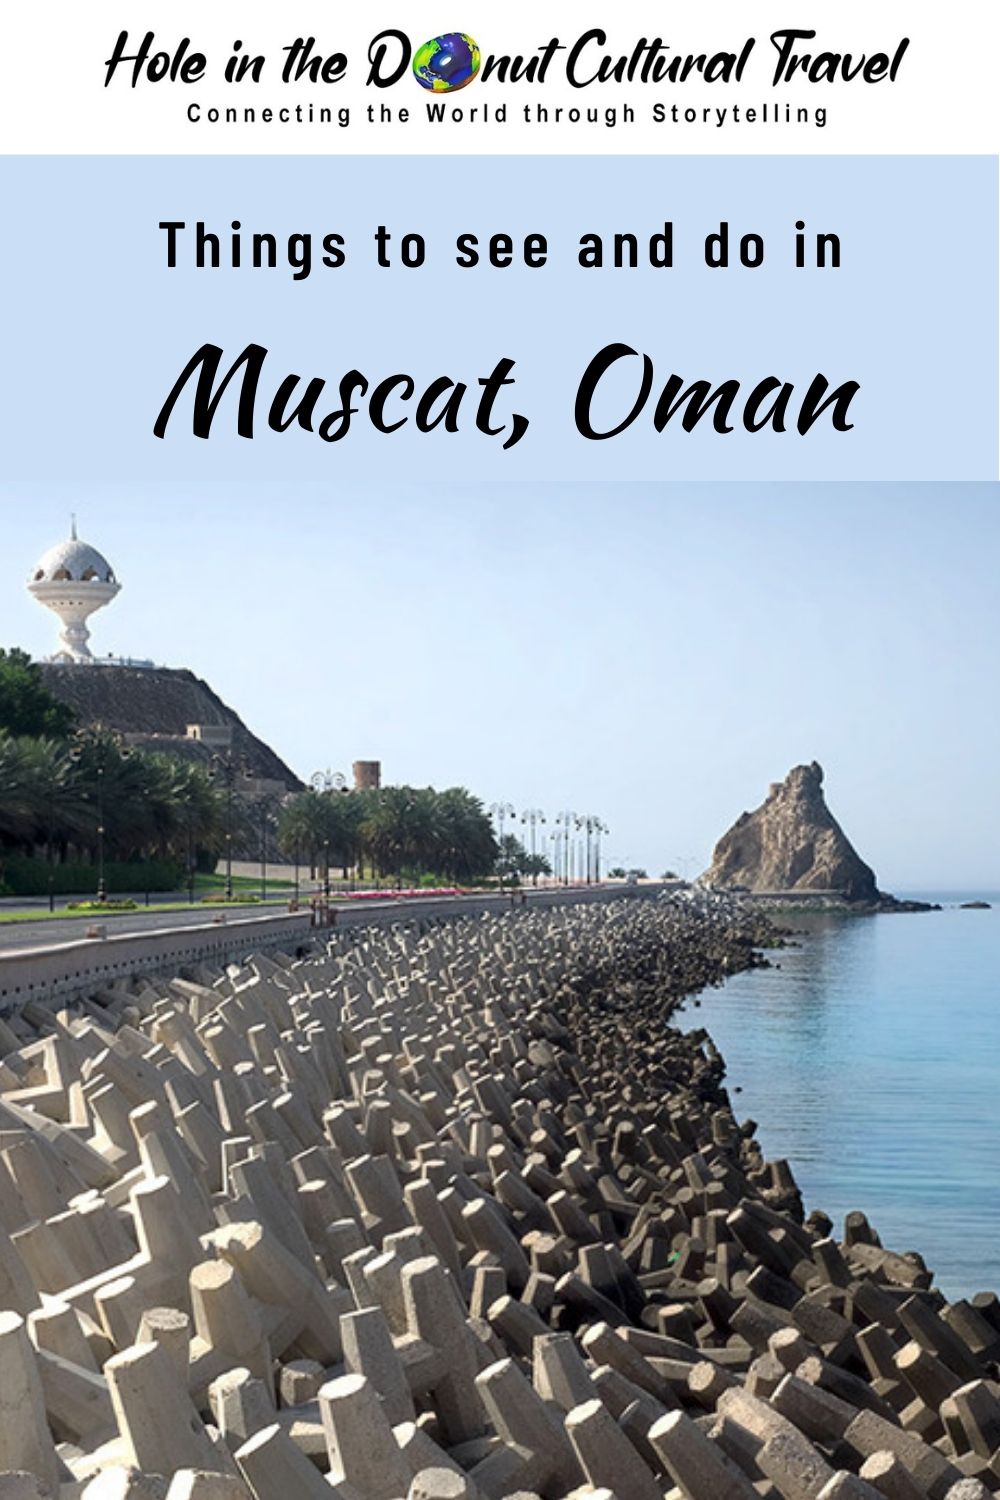 Muscat, Oman - Why I Hated It and Will Never Go Back